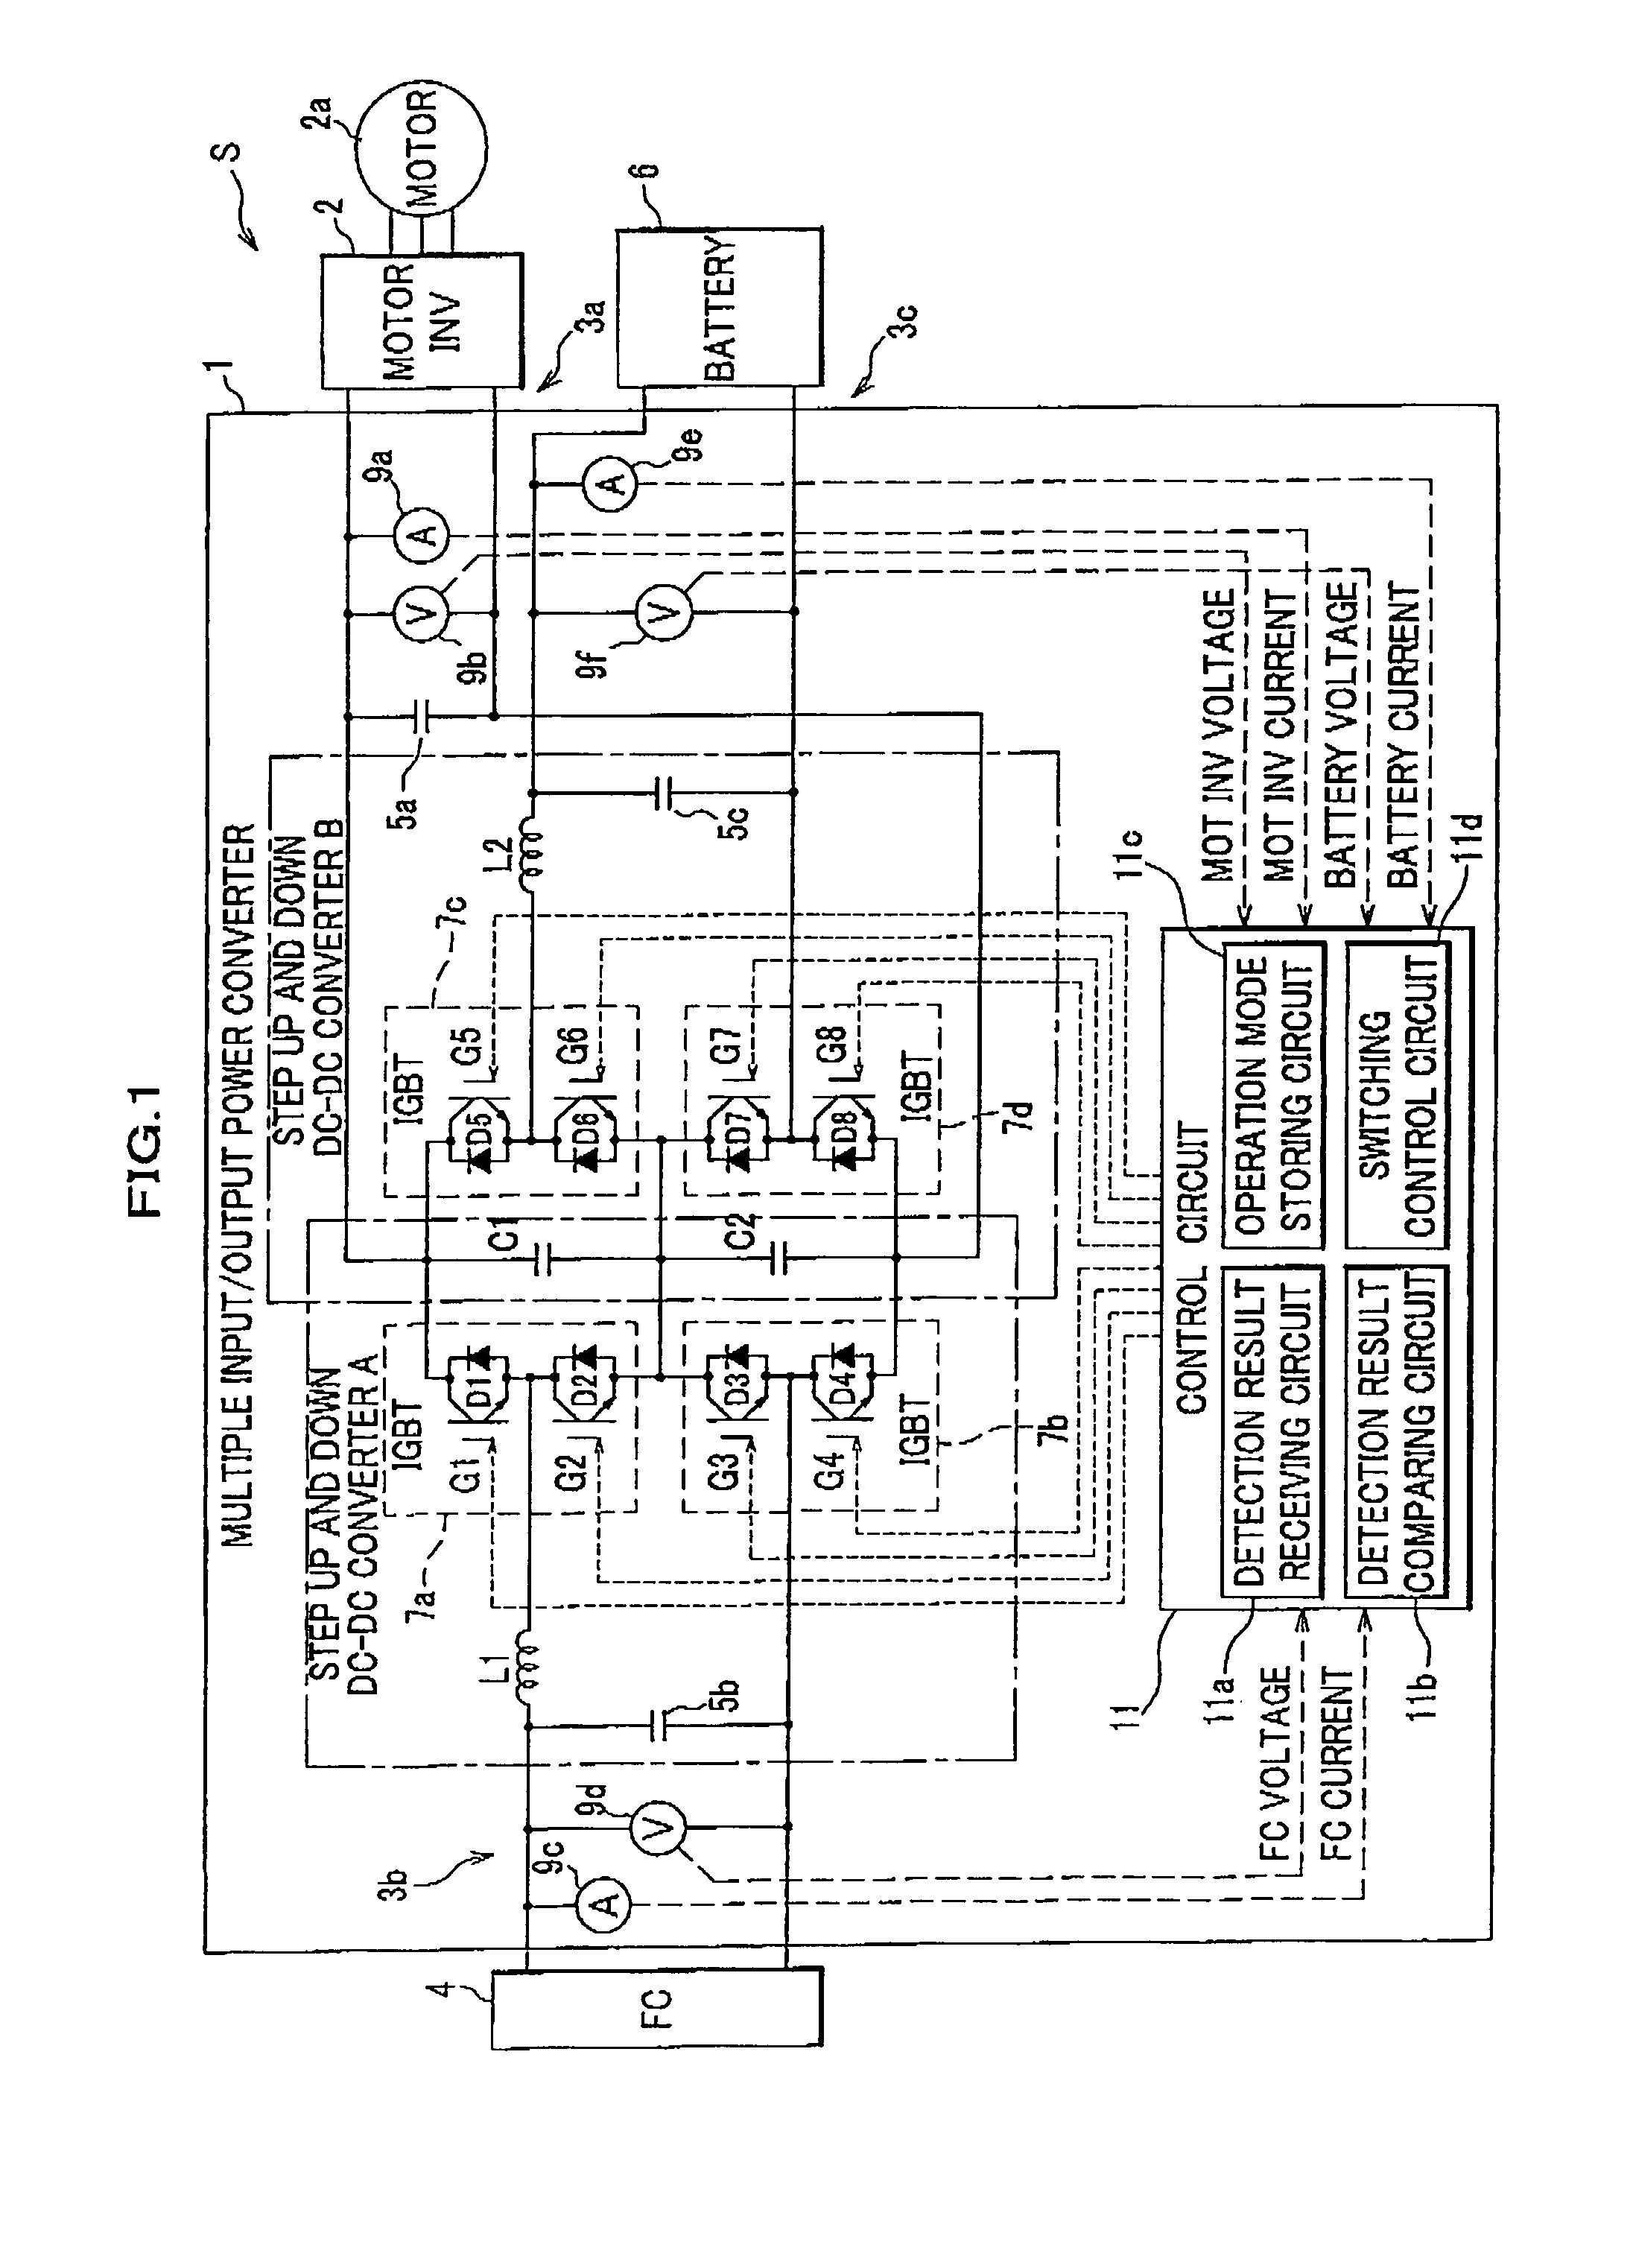 Multiple input/output power converter and fuel cell vehicle with same